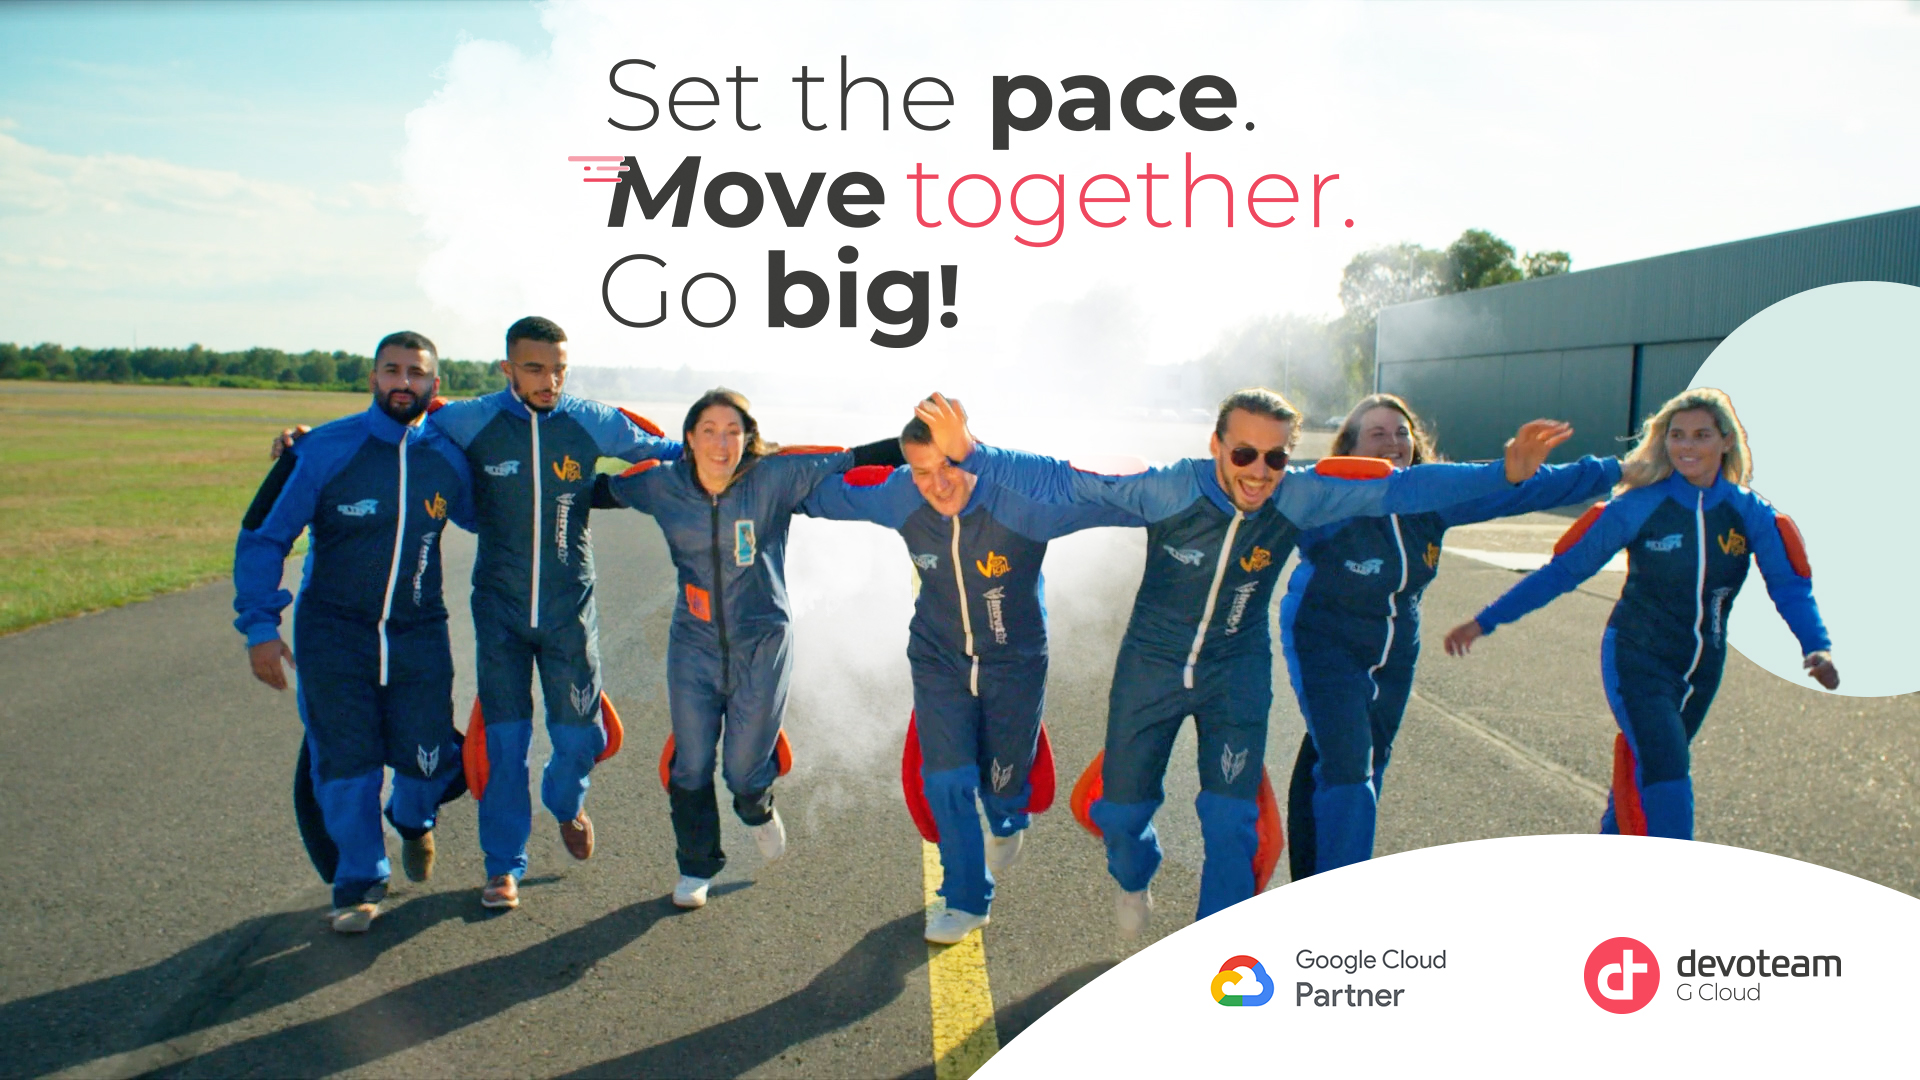 At Devoteam G Cloud We Set the pace, move together & go Big!